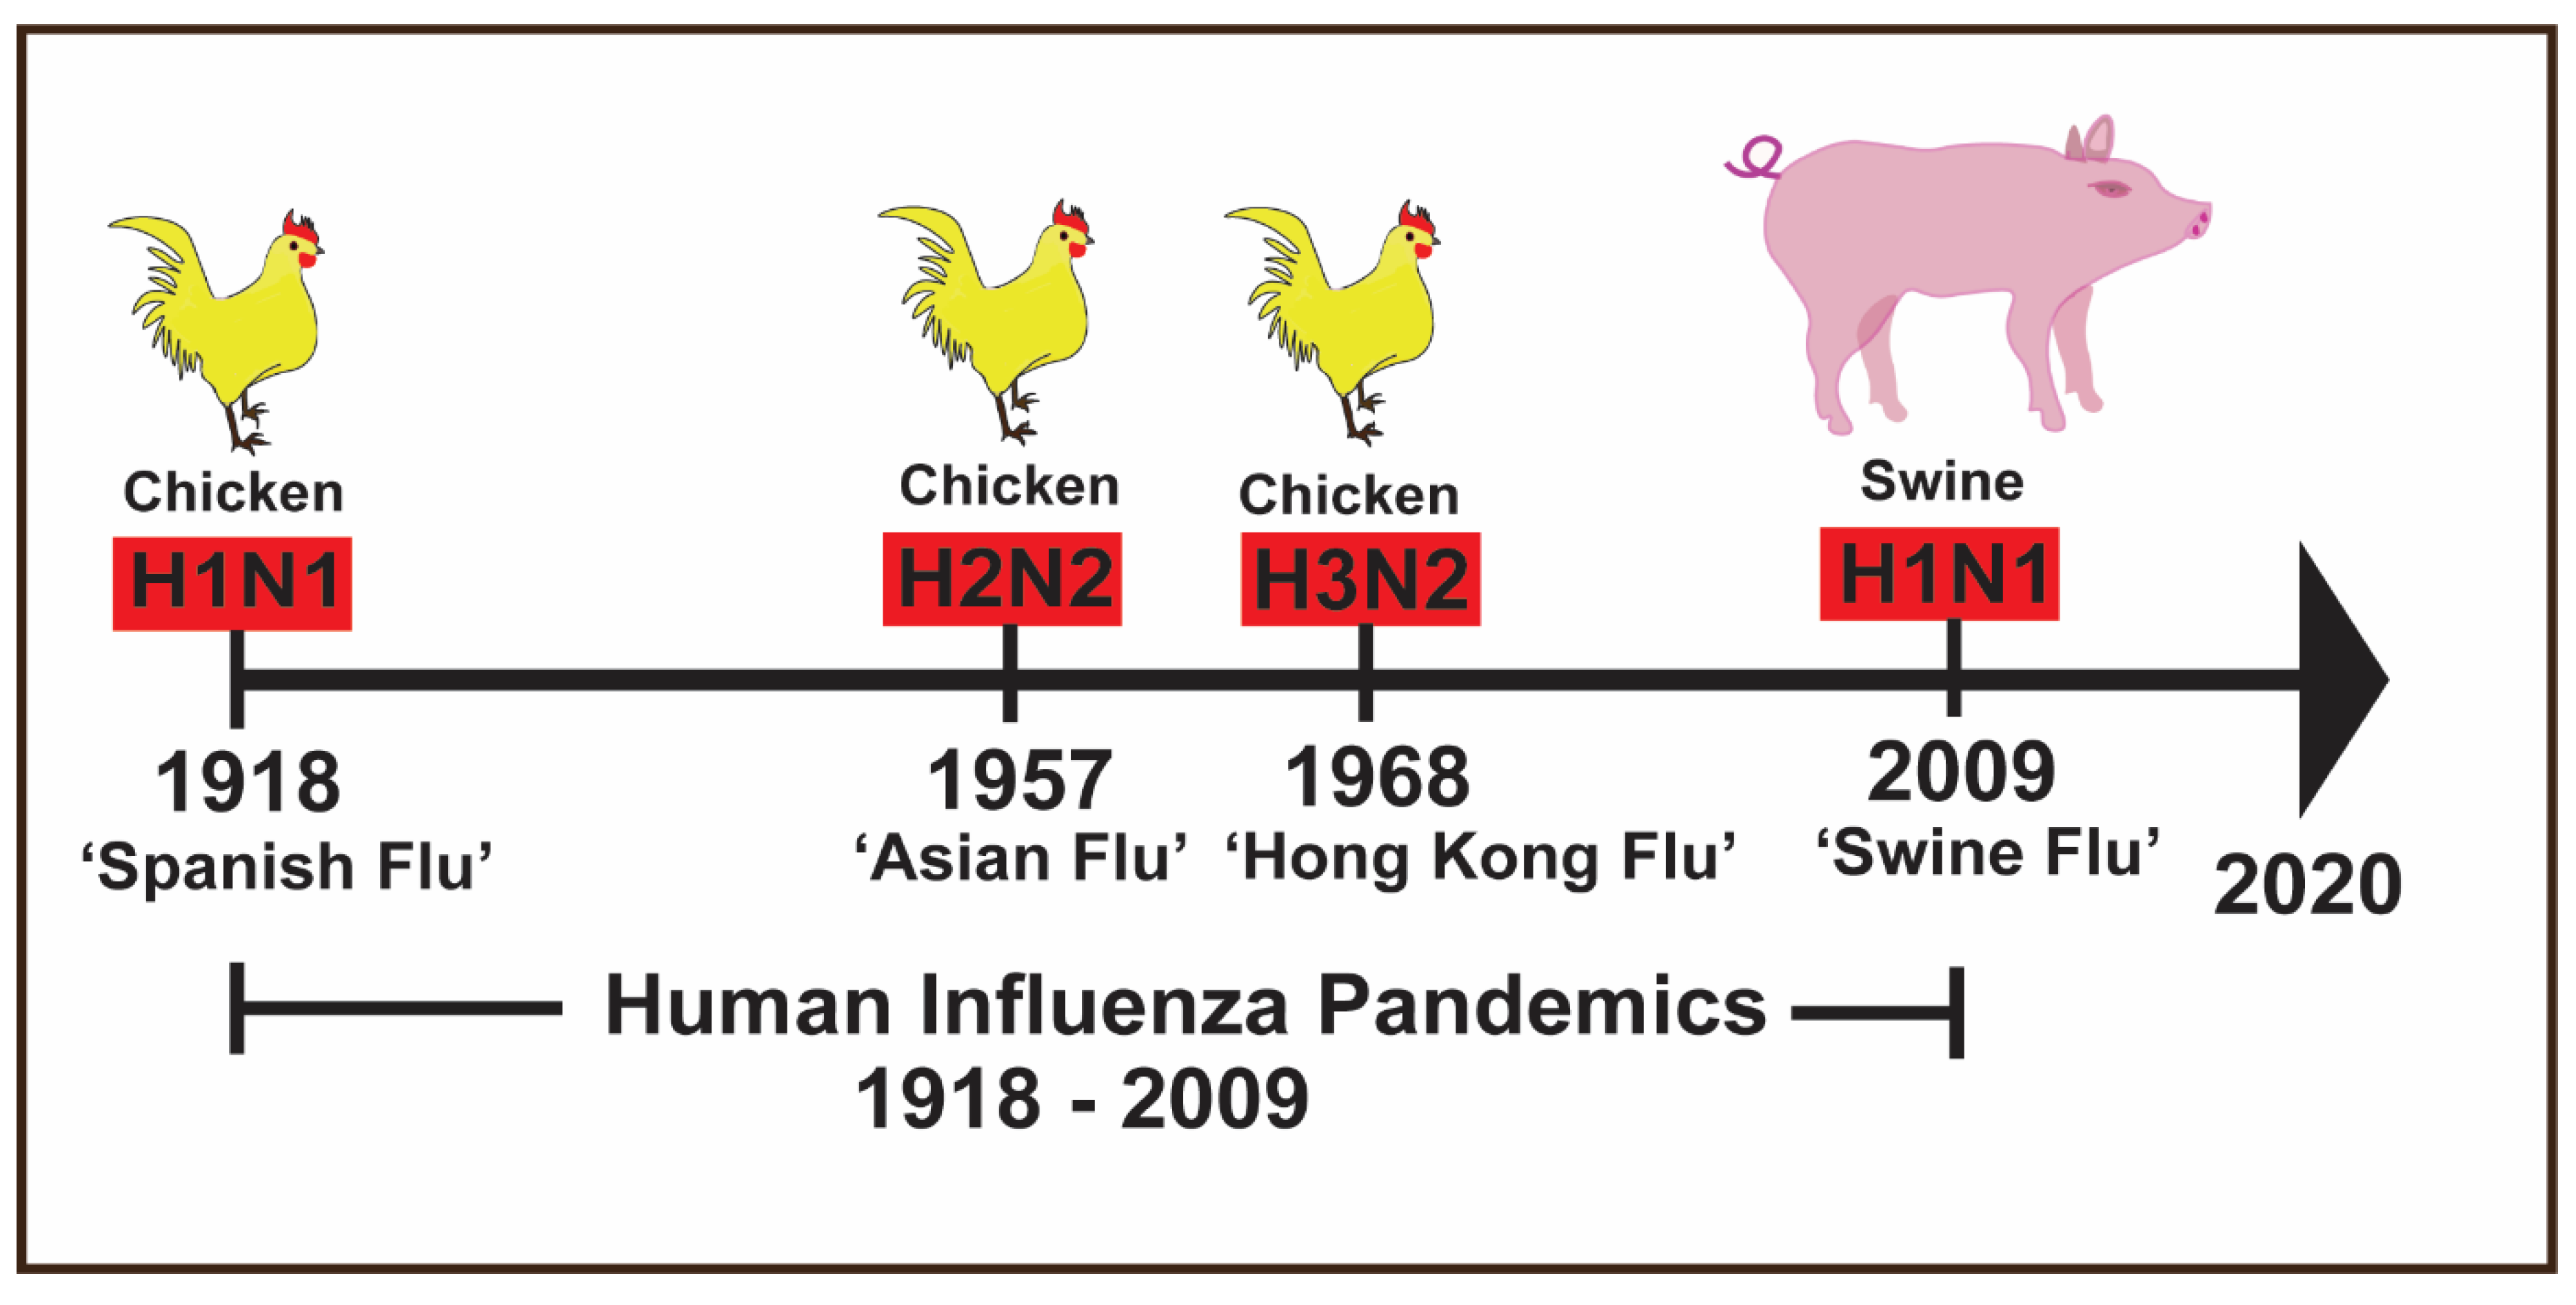 What is the difference between H1N1 and H2N2?